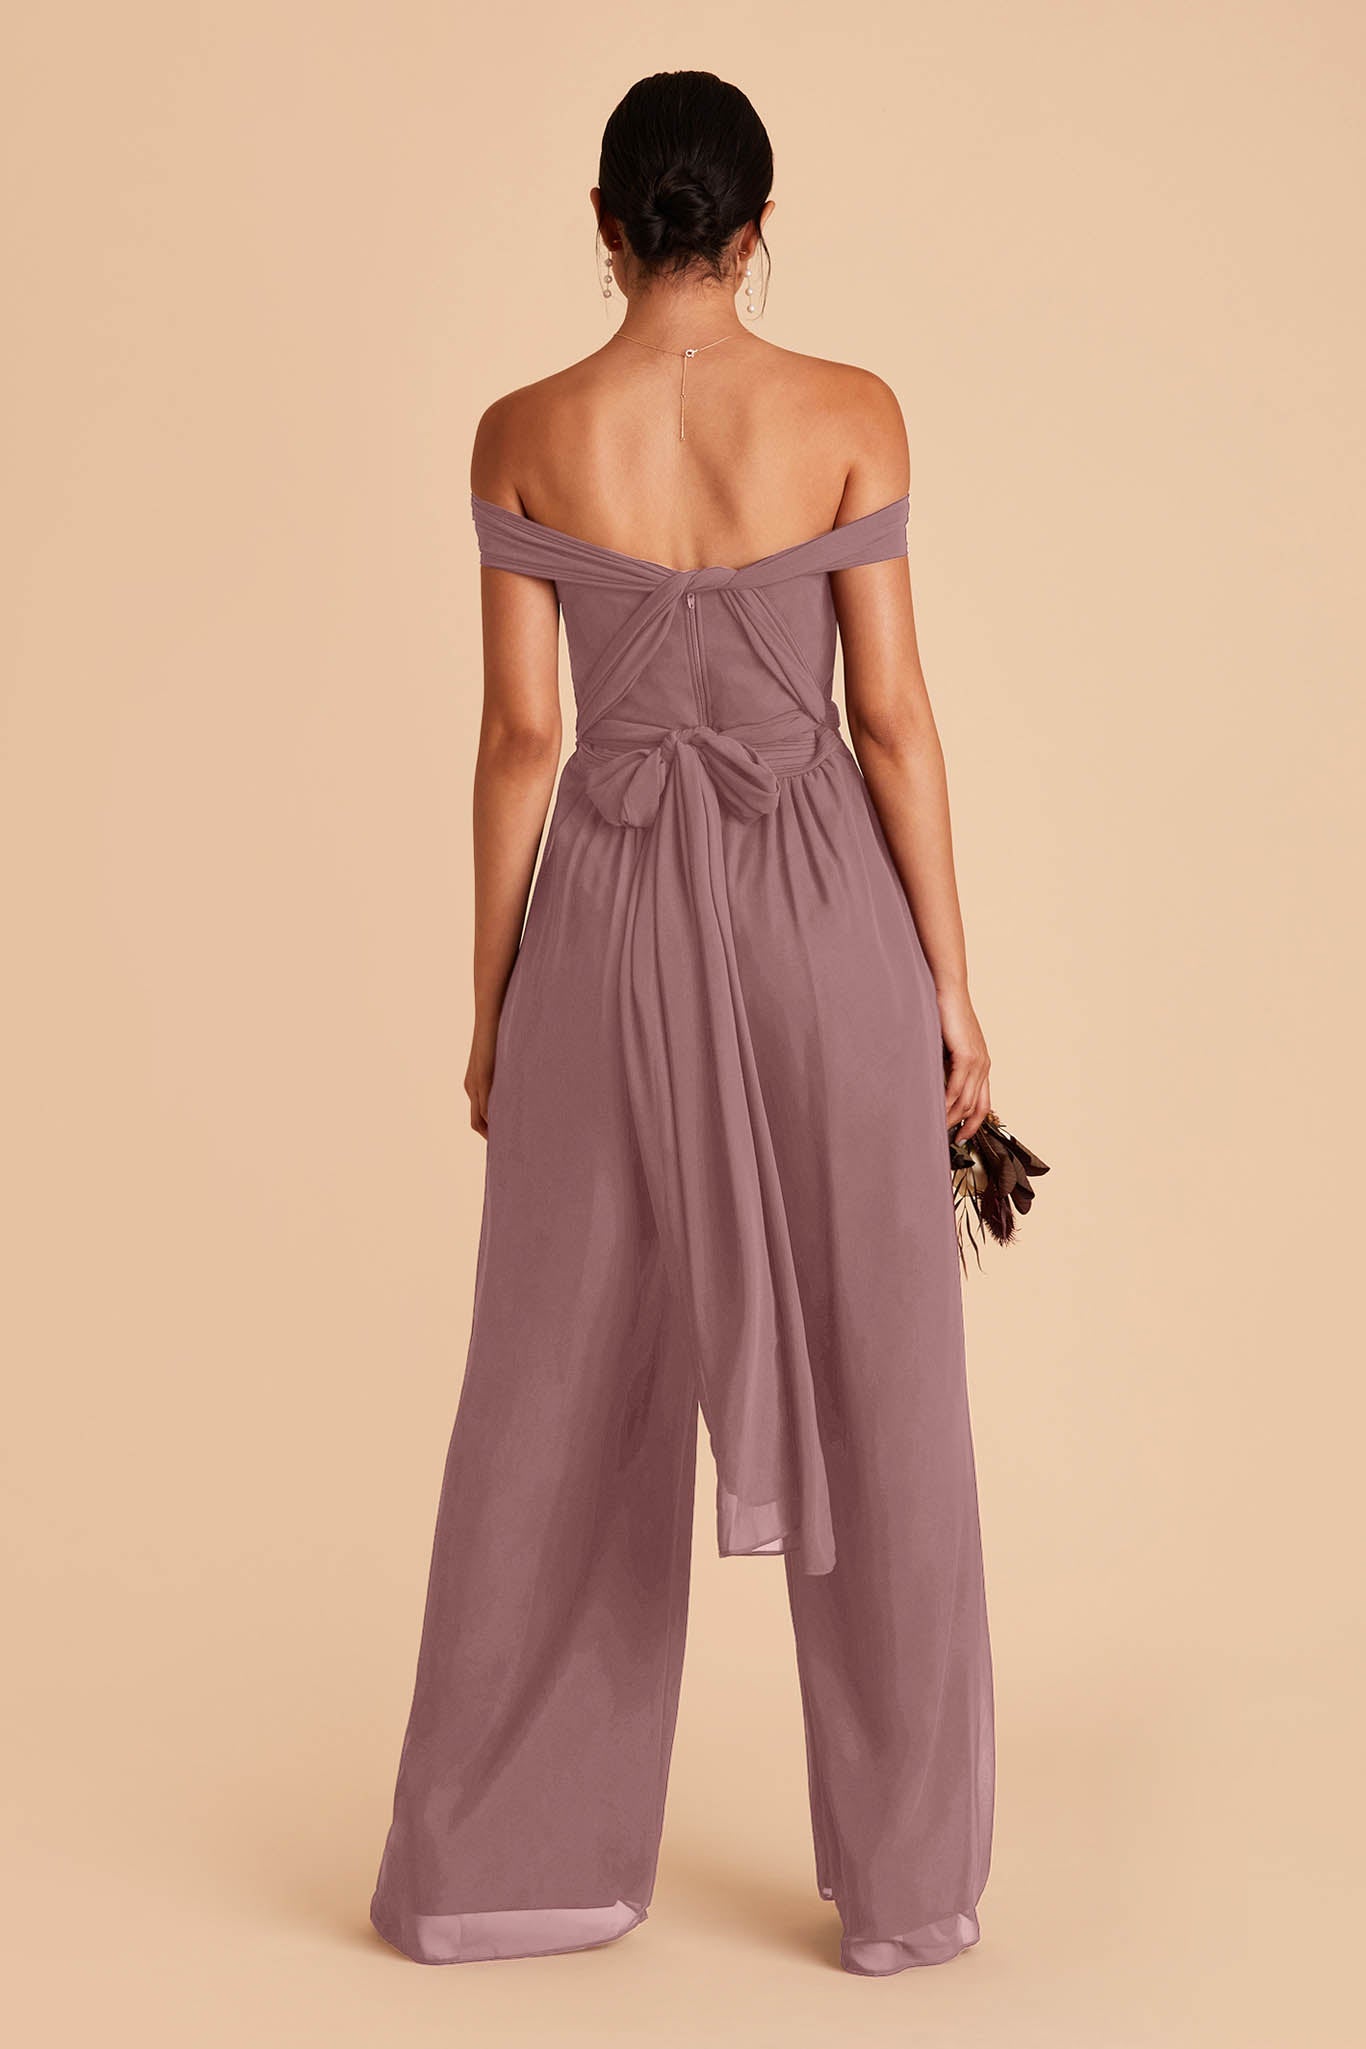 medium purple wedding jumpsuit with convertible neckline and tie with a bow in the back